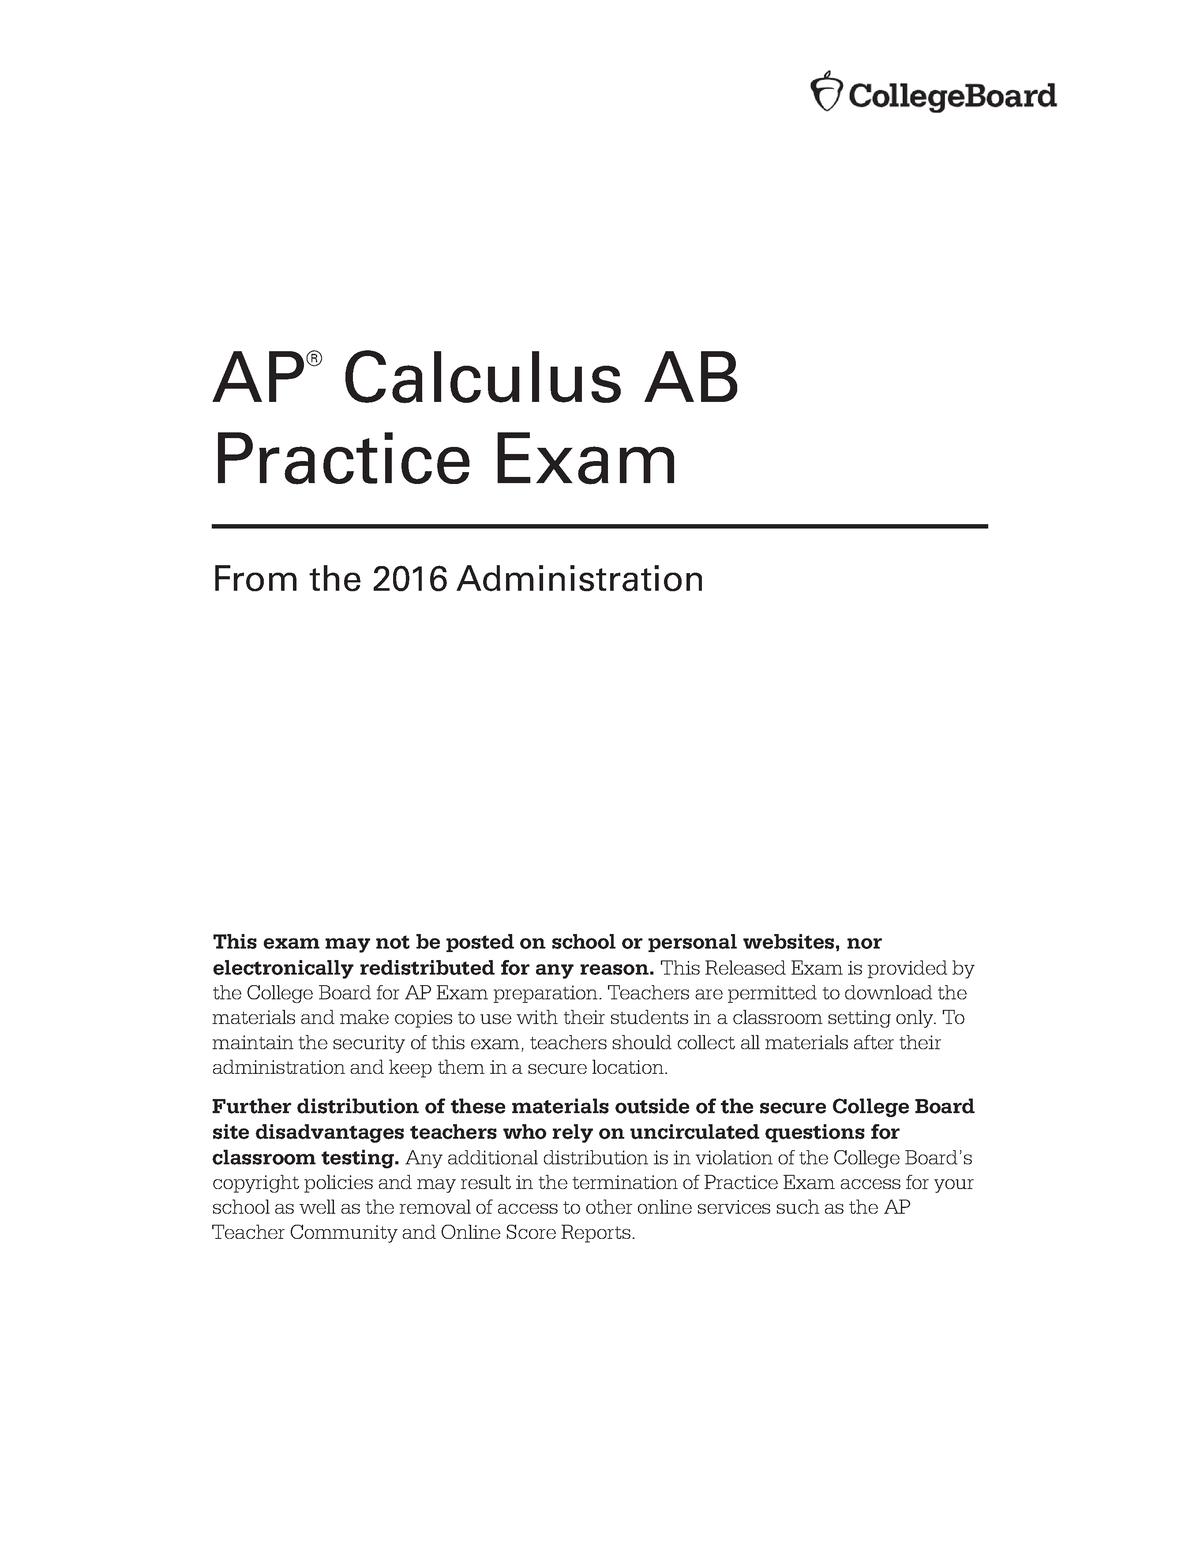 2016-ap-calculus-ab-practice-exam-mcq-multiple-choice-questions-with-answers-advanced-placement